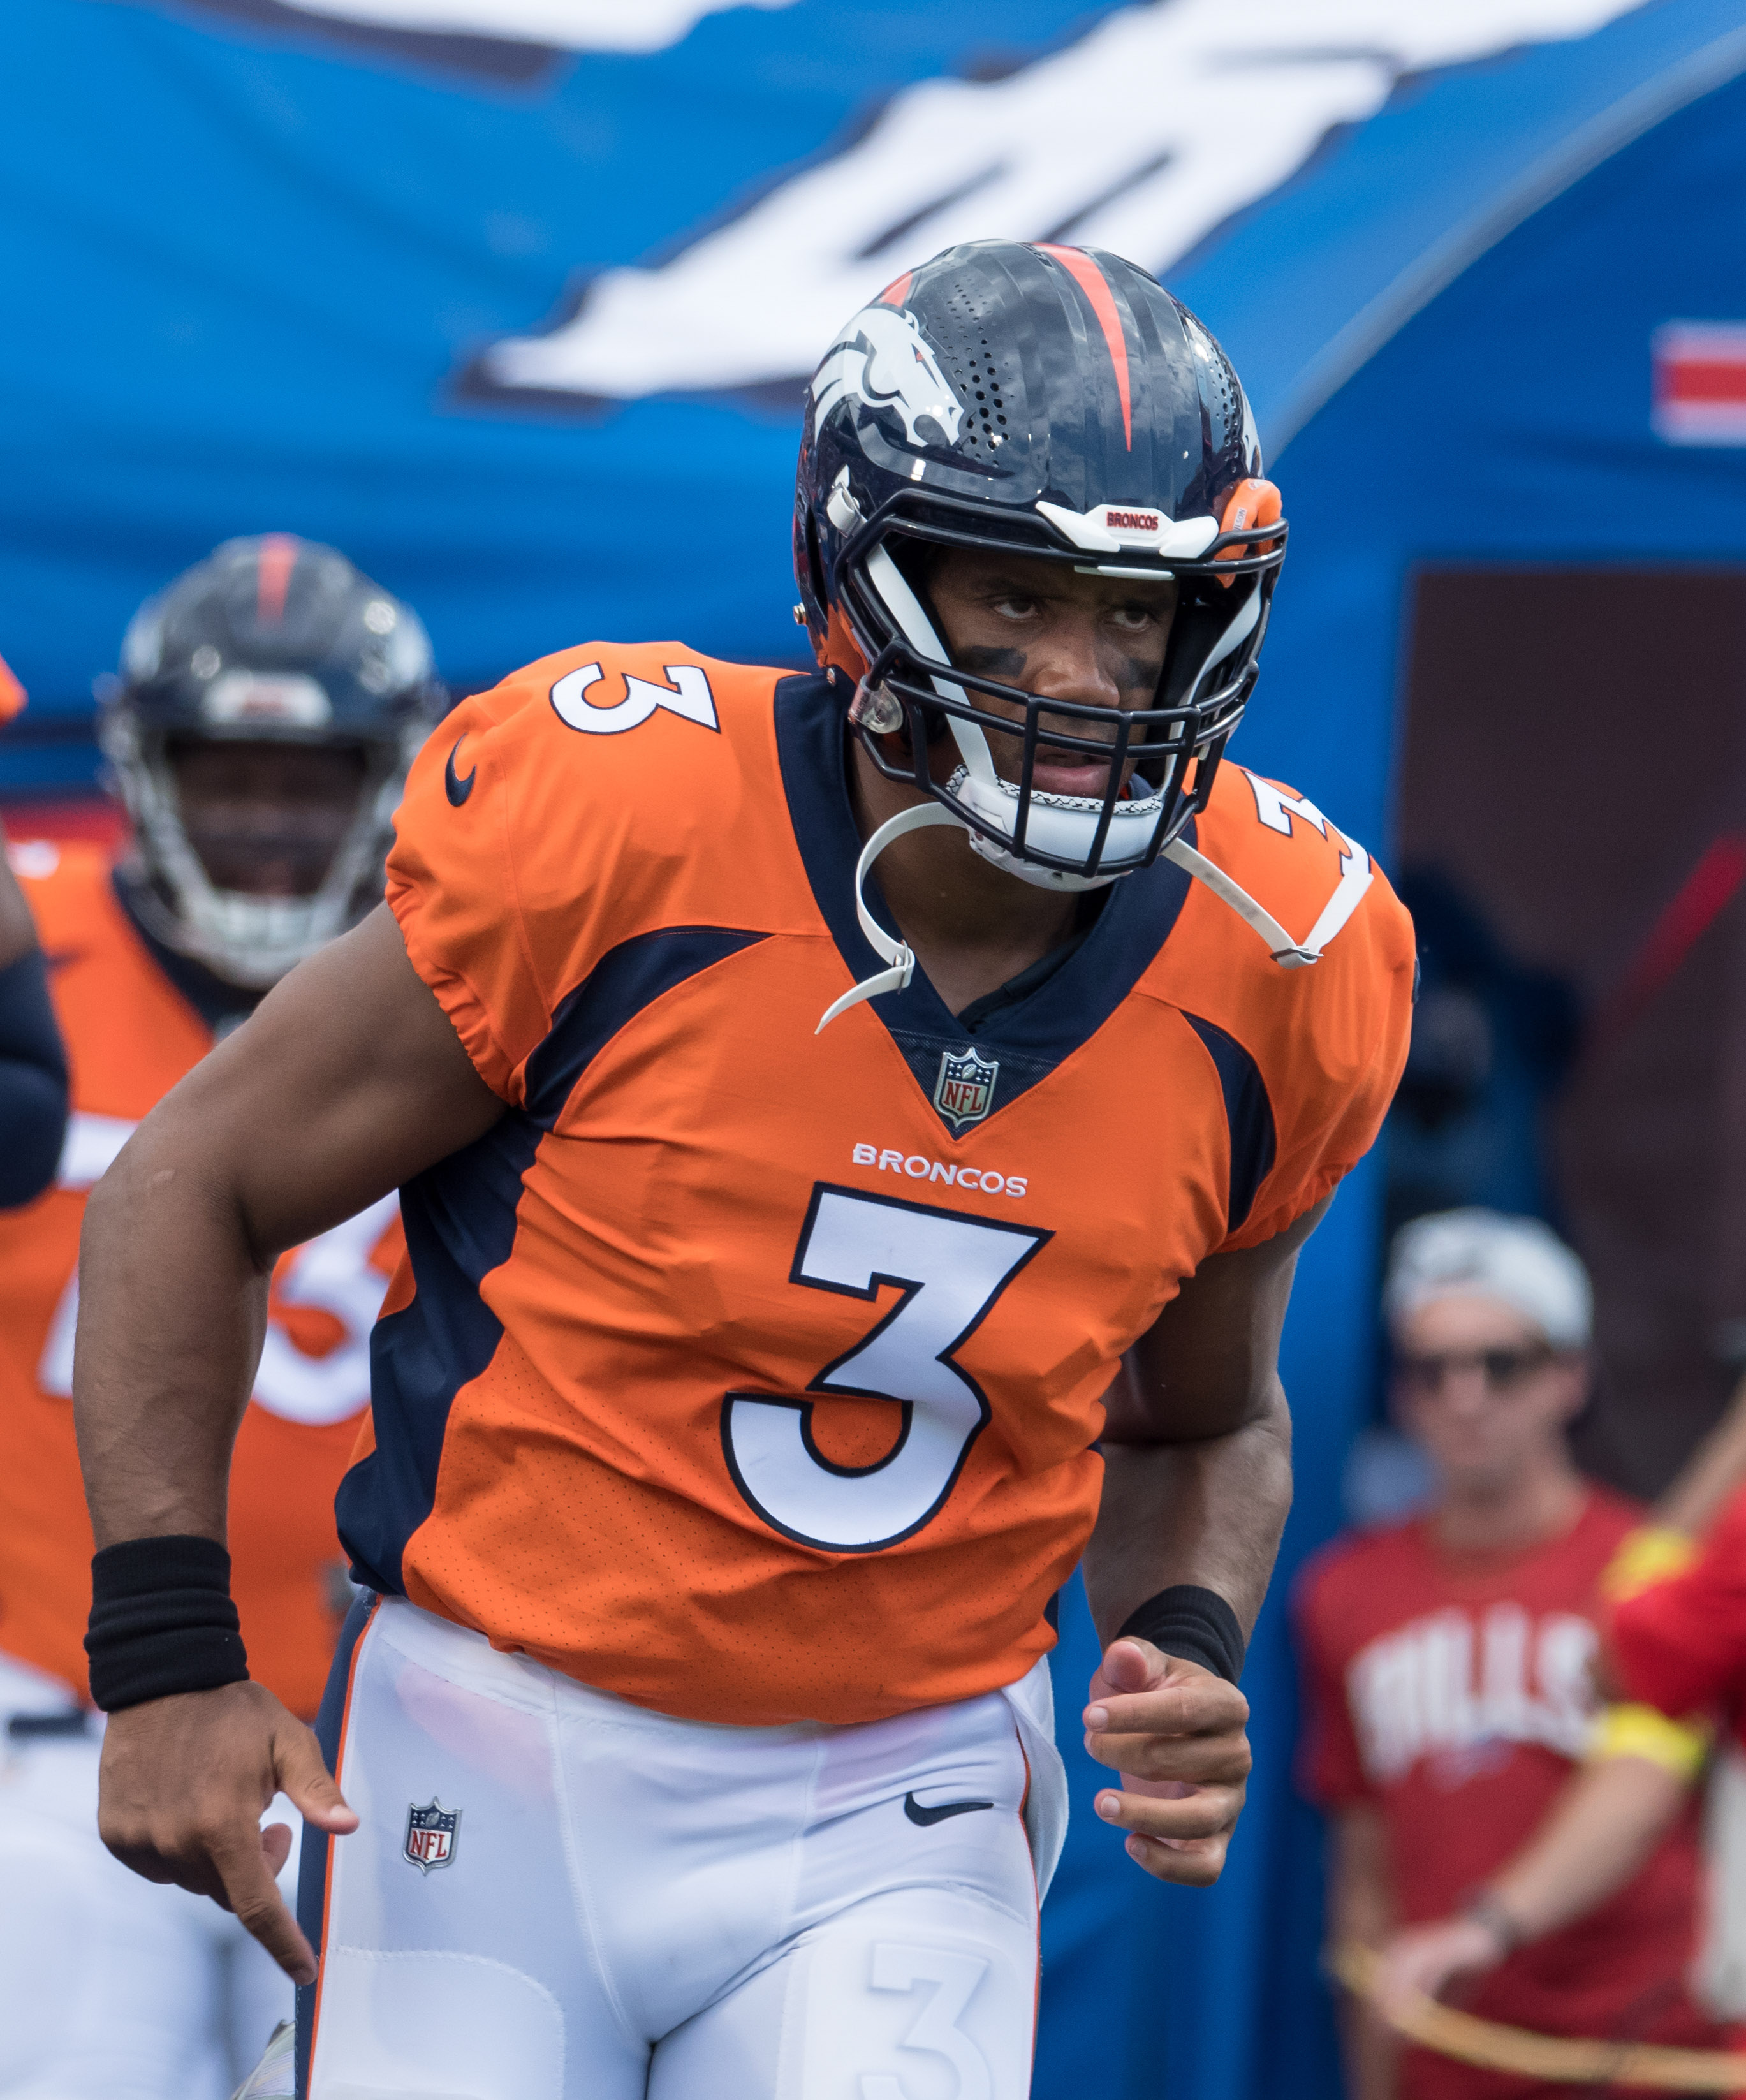 Broncos, Russell Wilson Agree On Extension